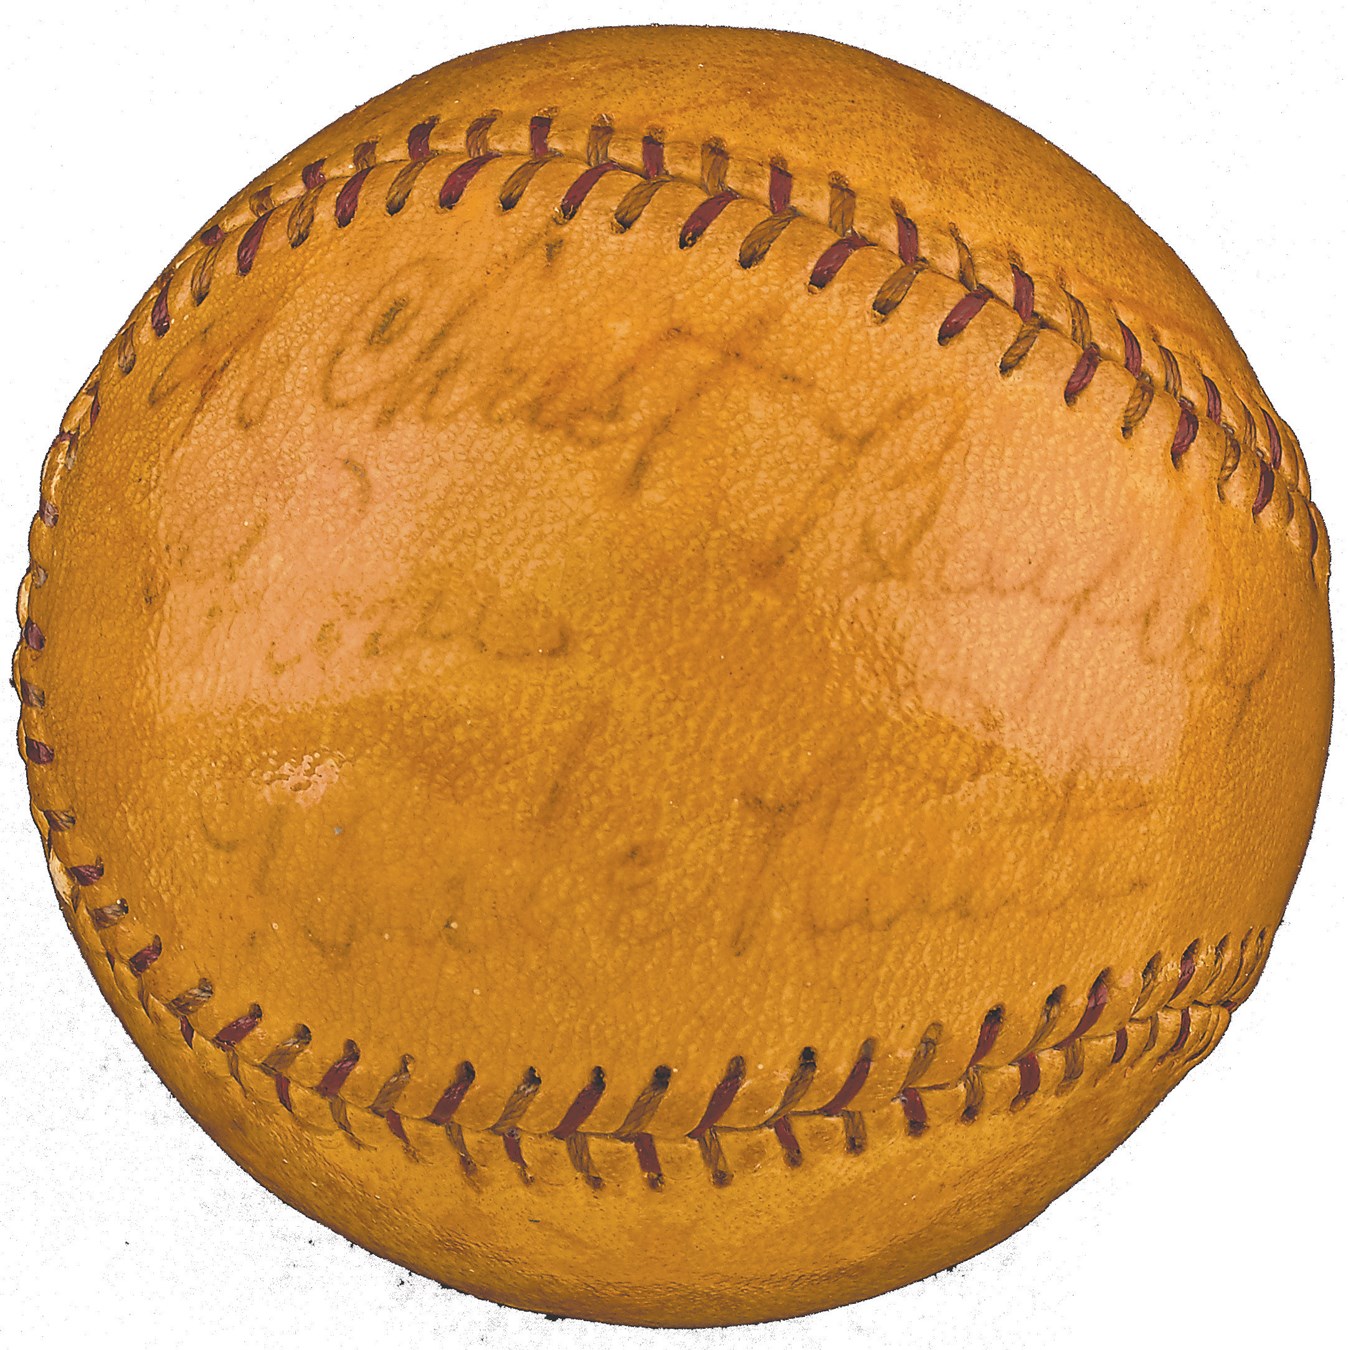 Ruth and Gehrig - Babe Ruth Signed Inscribed "To Christ" Baseball (JSA)